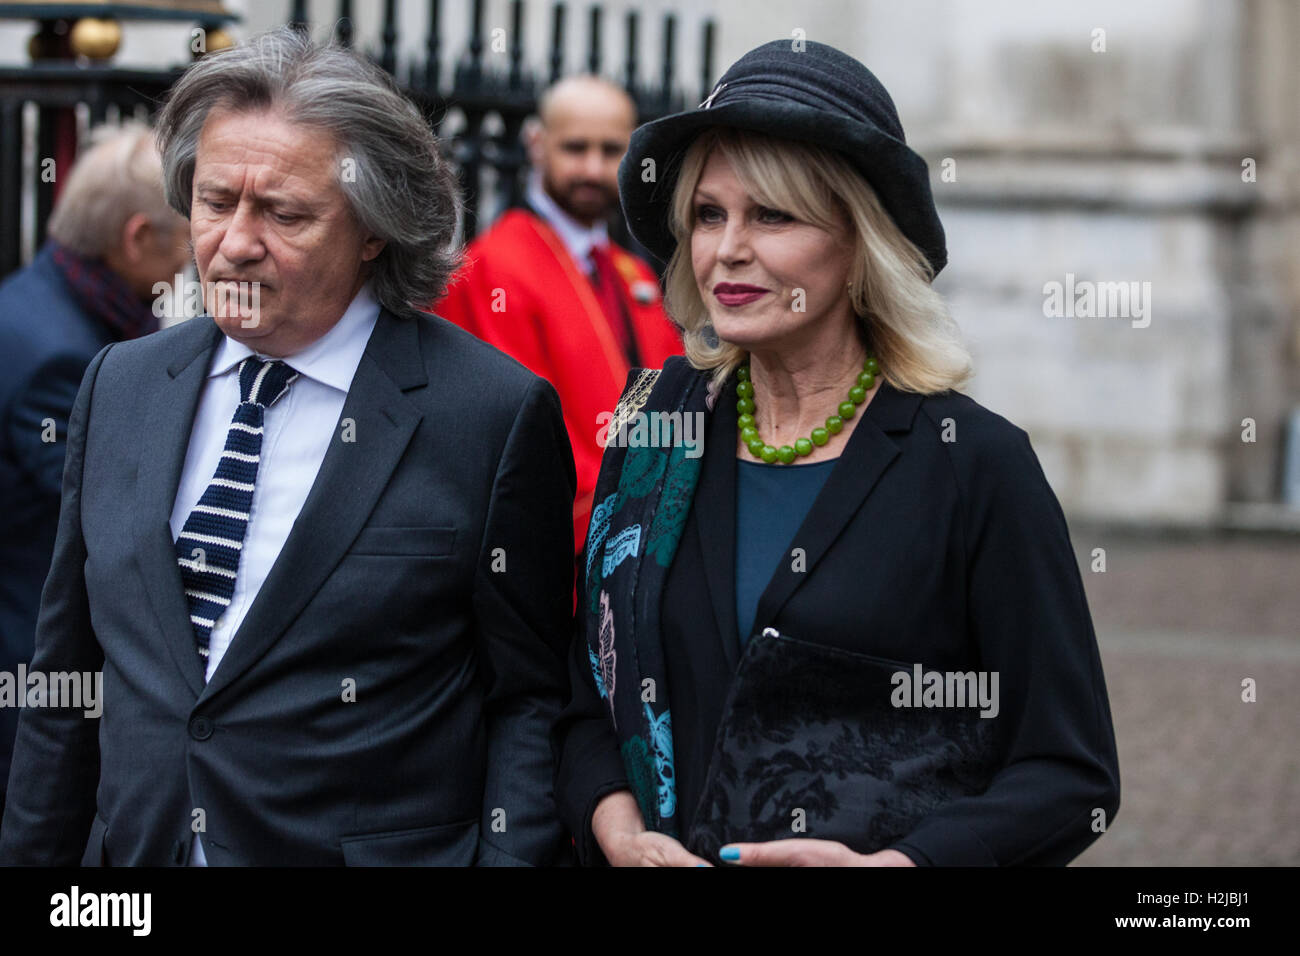 London, UK. 27th September, 2016. Joanna Lumley leaves the memorial service for Sir Terry Wogan at Westminster Abbey. Stock Photo